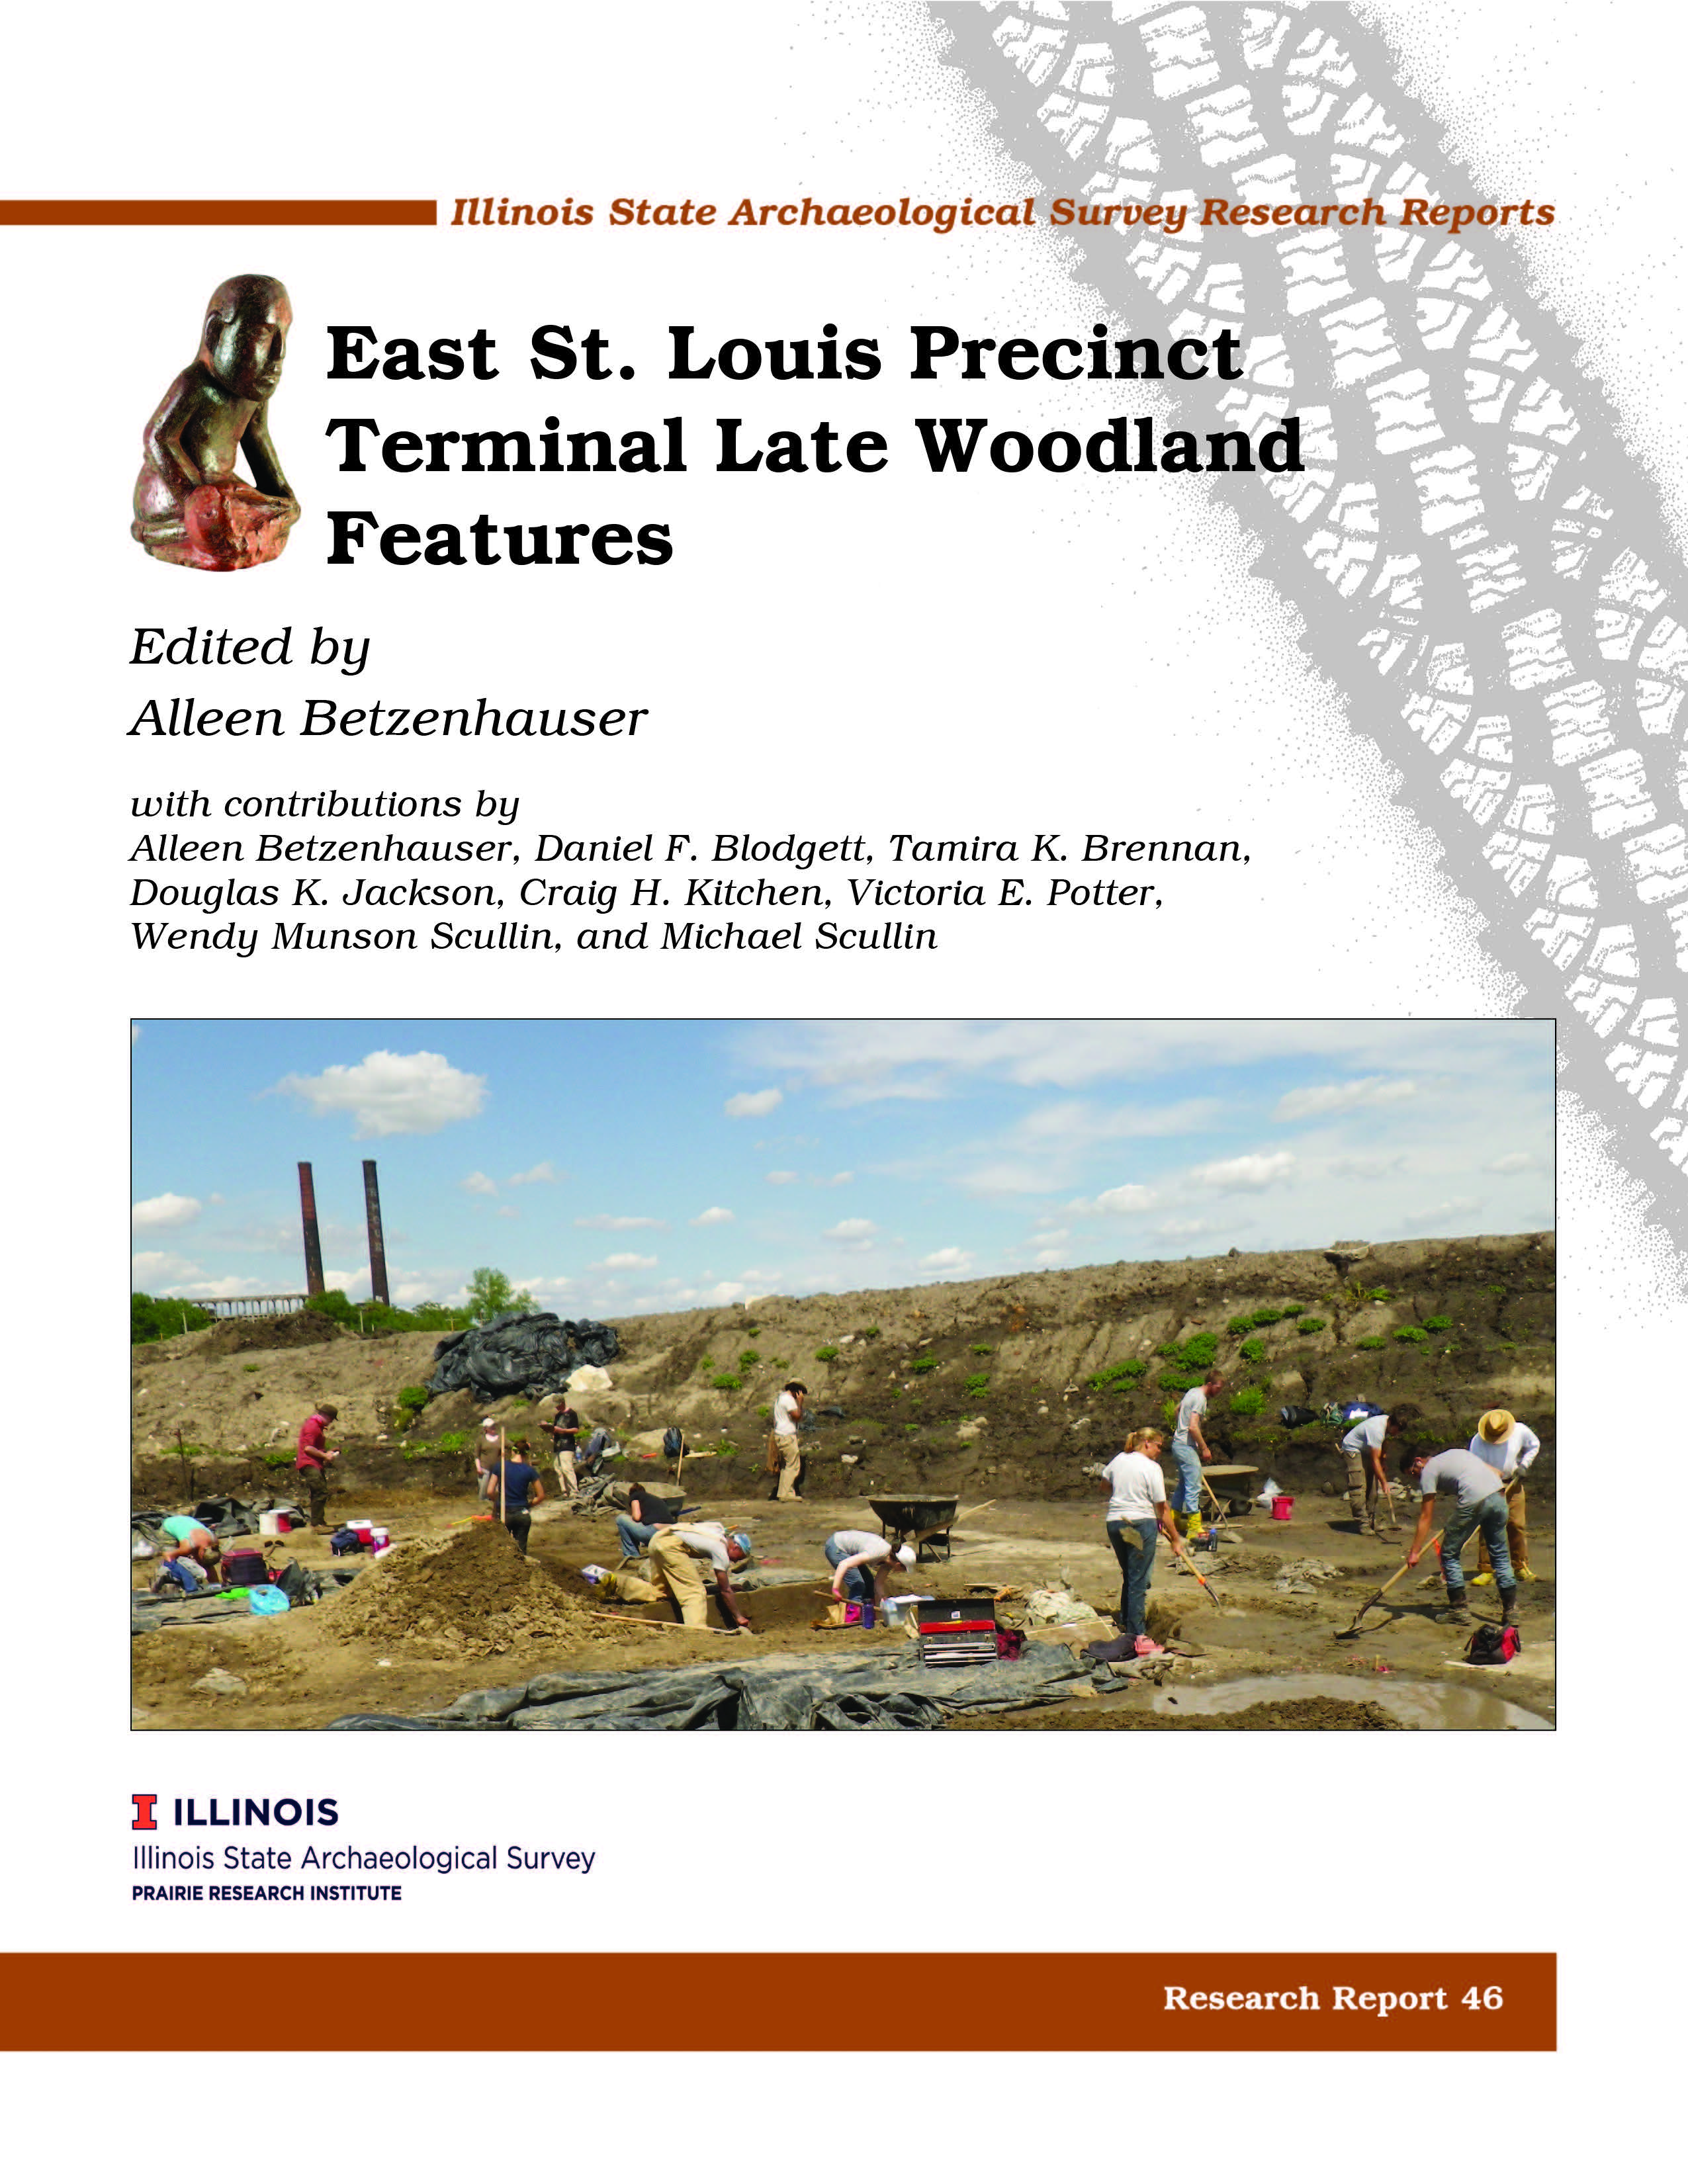 East St. Louis Precinct Terminal Late Woodland Features